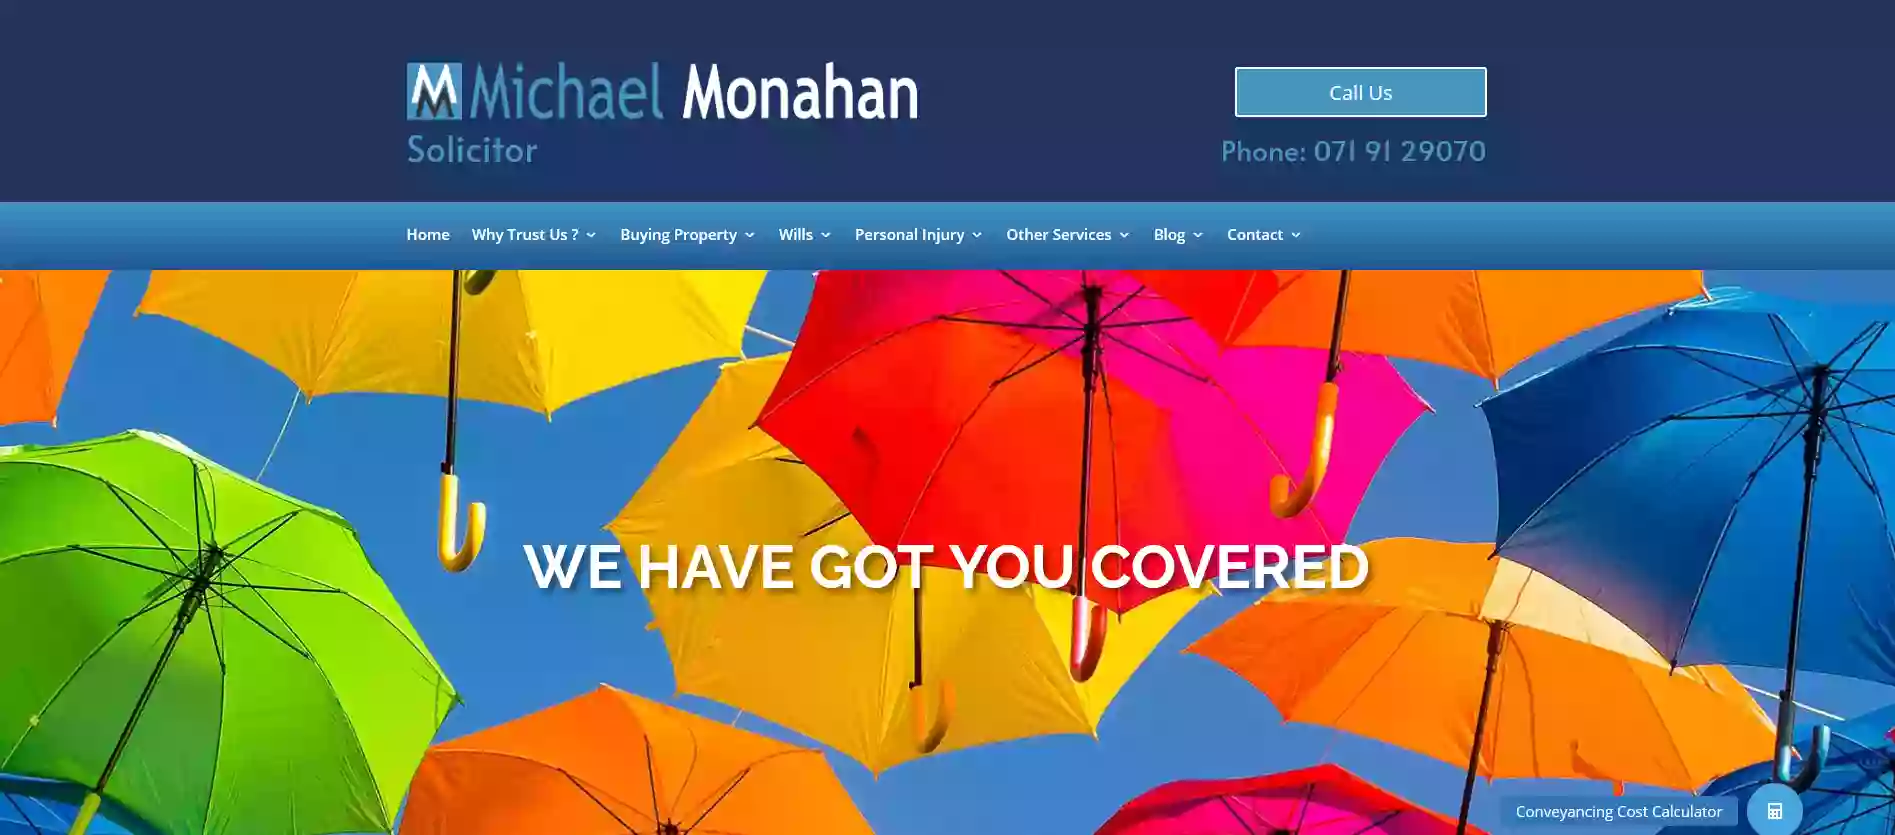 Michael Monahan Solicitor